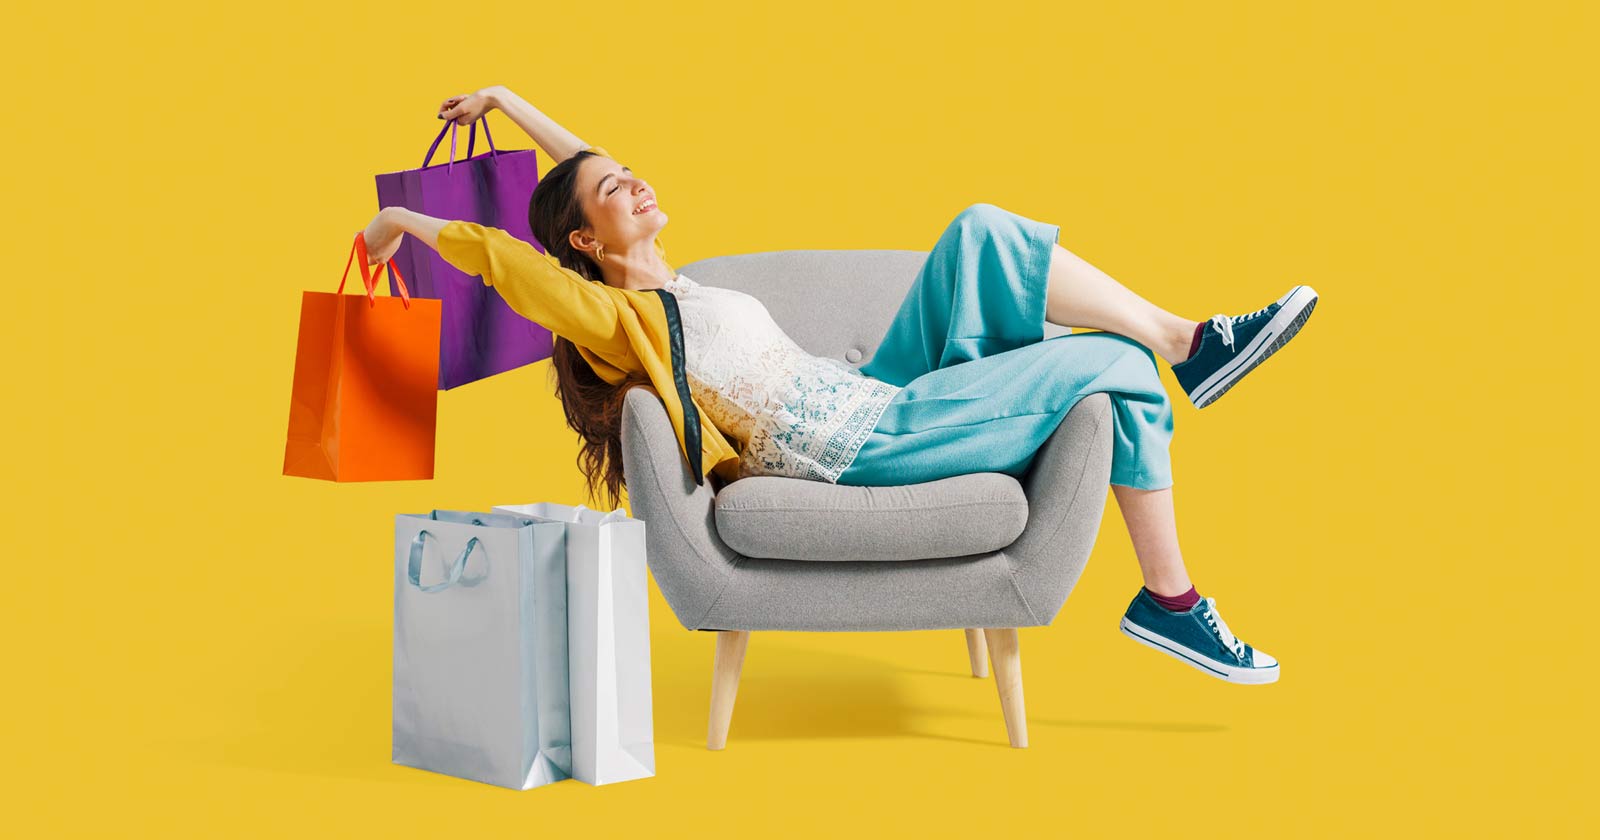 Image of a woman on a couch with shopping bags